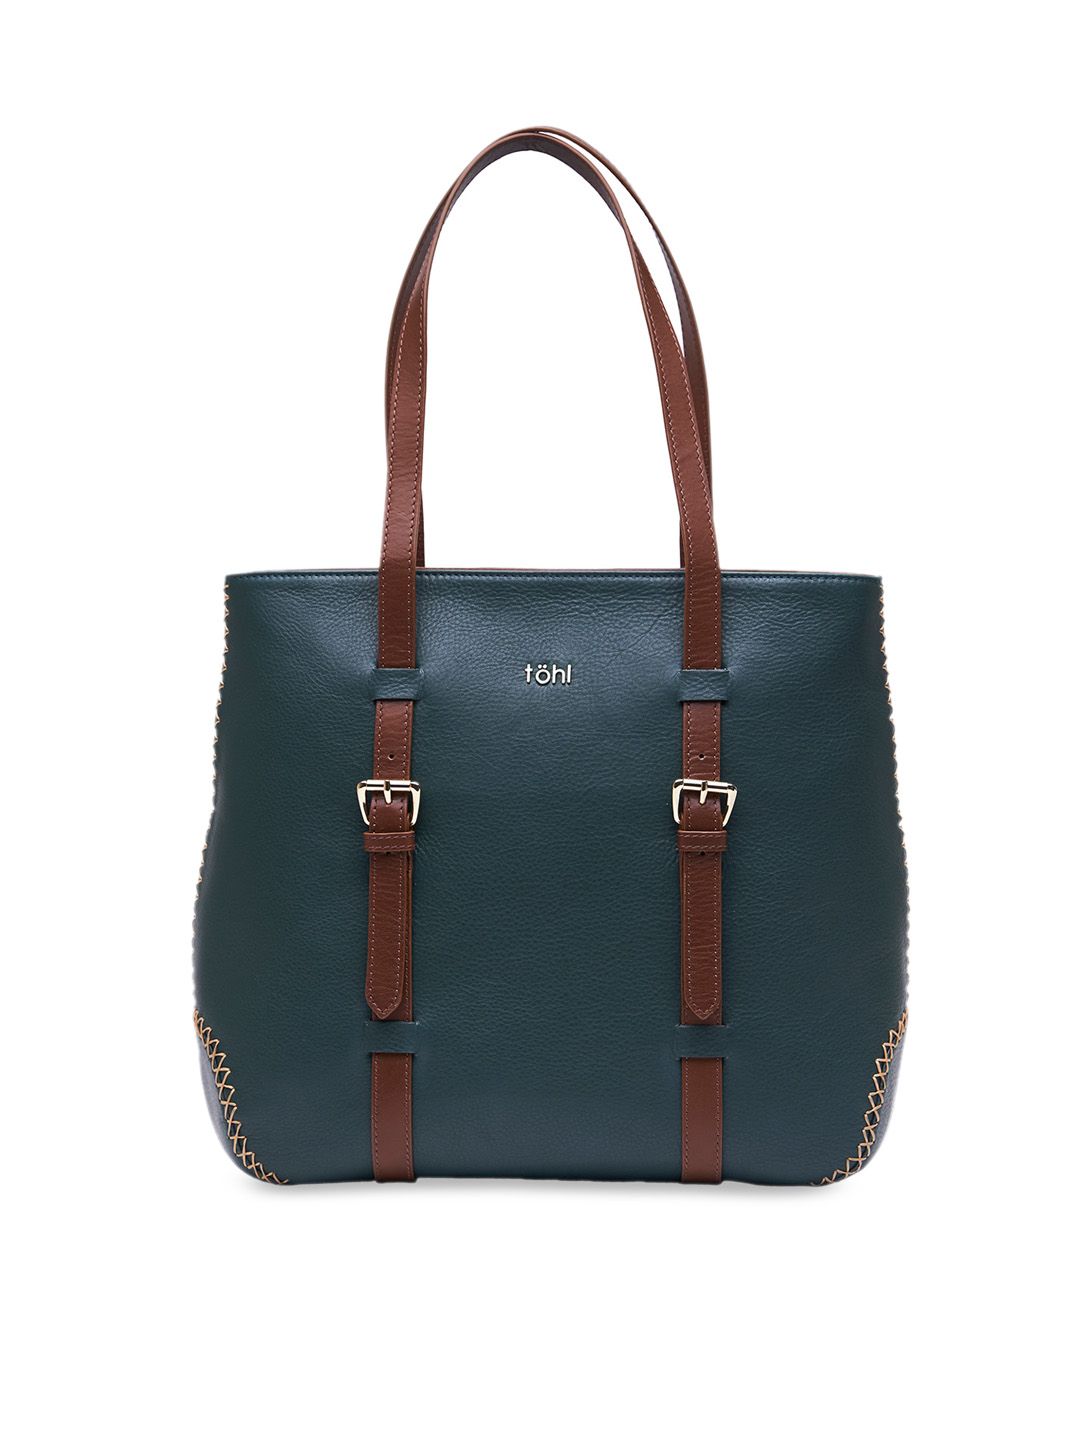 tohl Green Solid Leather Shoulder Bag Price in India